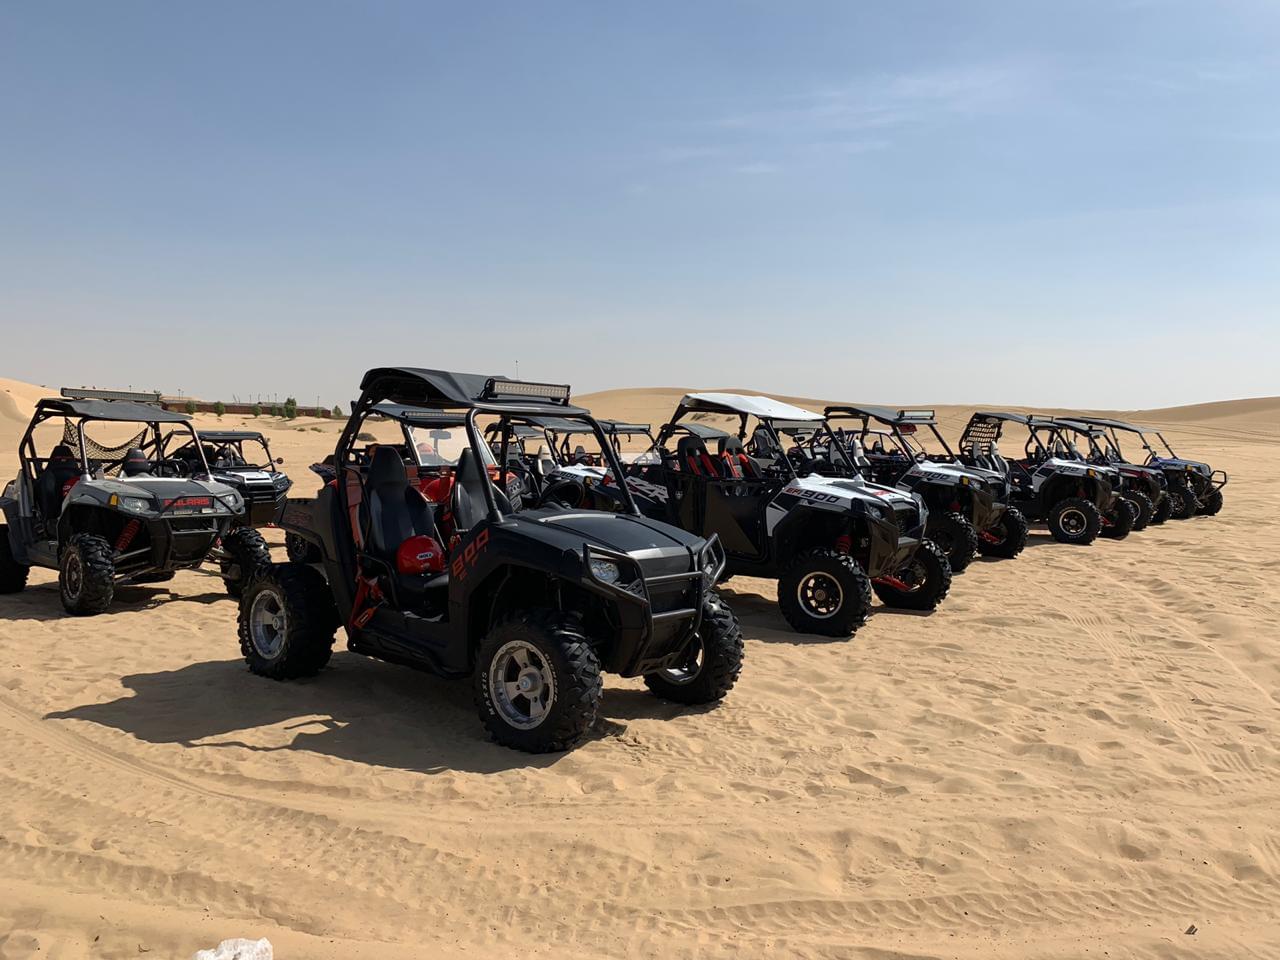 Dune Buggies parked at the desert.